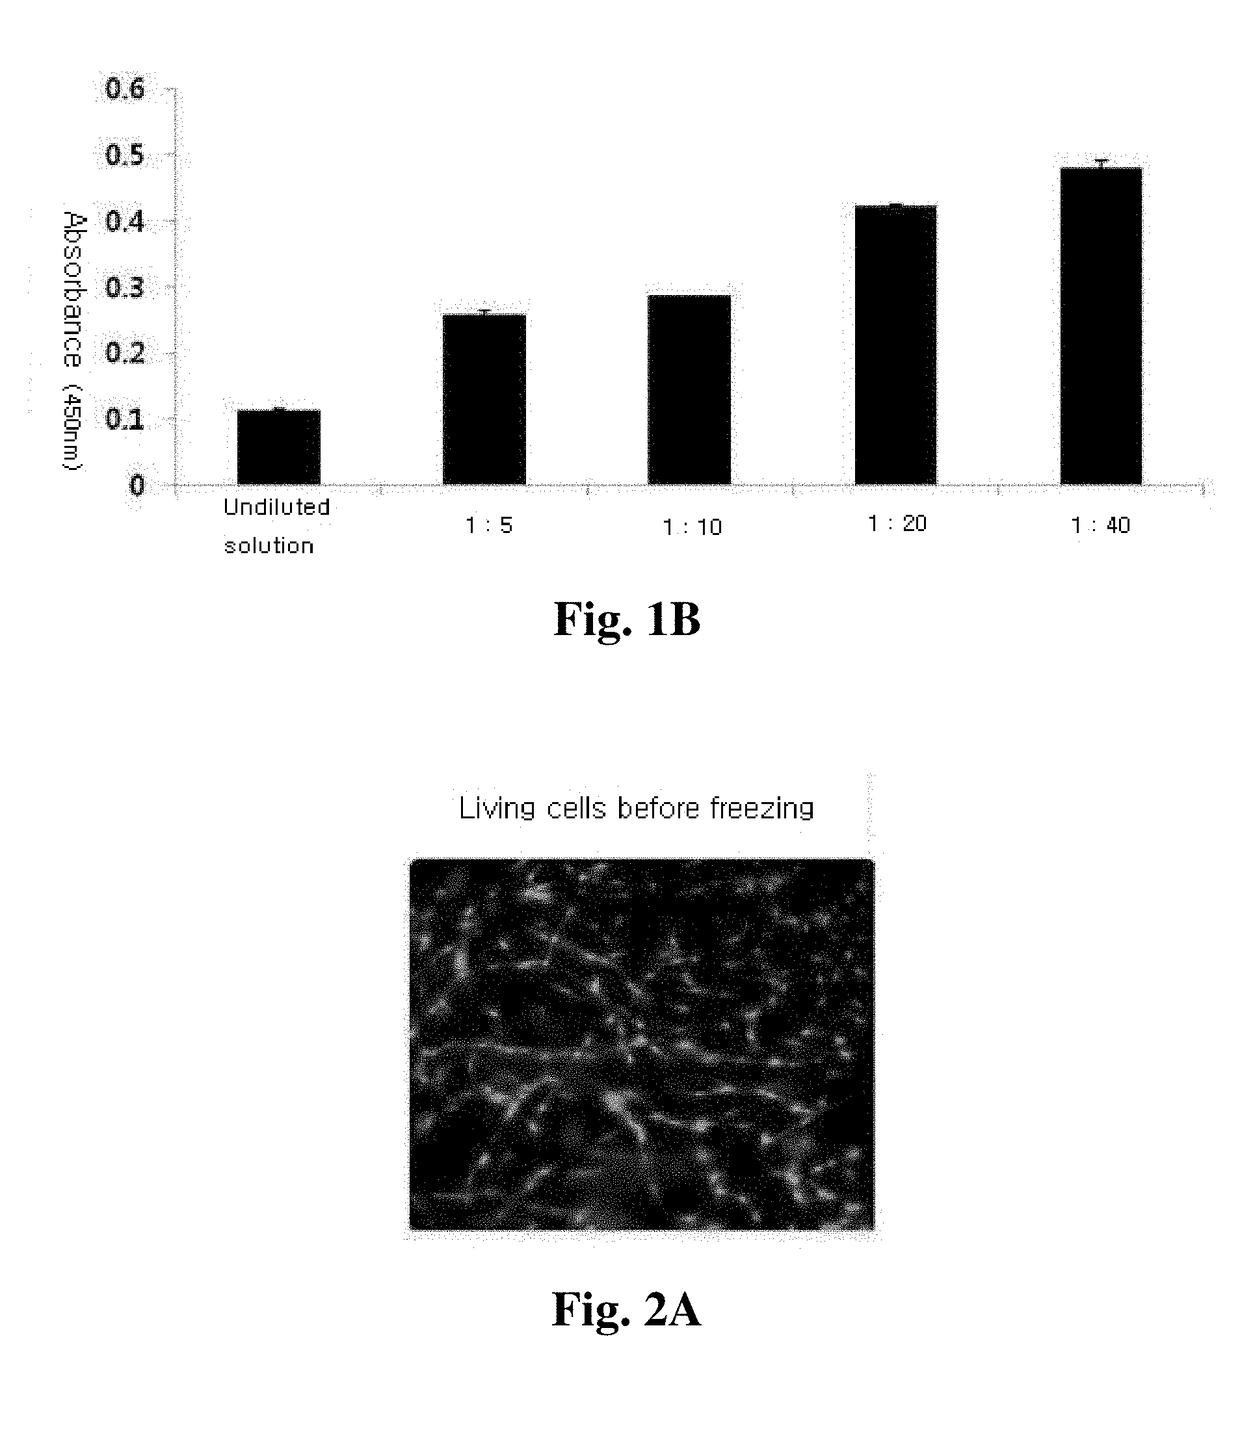 Mesenchymal stem cells-hydrogel-biodegradable or mesenchymal stem cells-hydrogel-nondegradable support composition for alleviating or improving epidermolysis bullosa